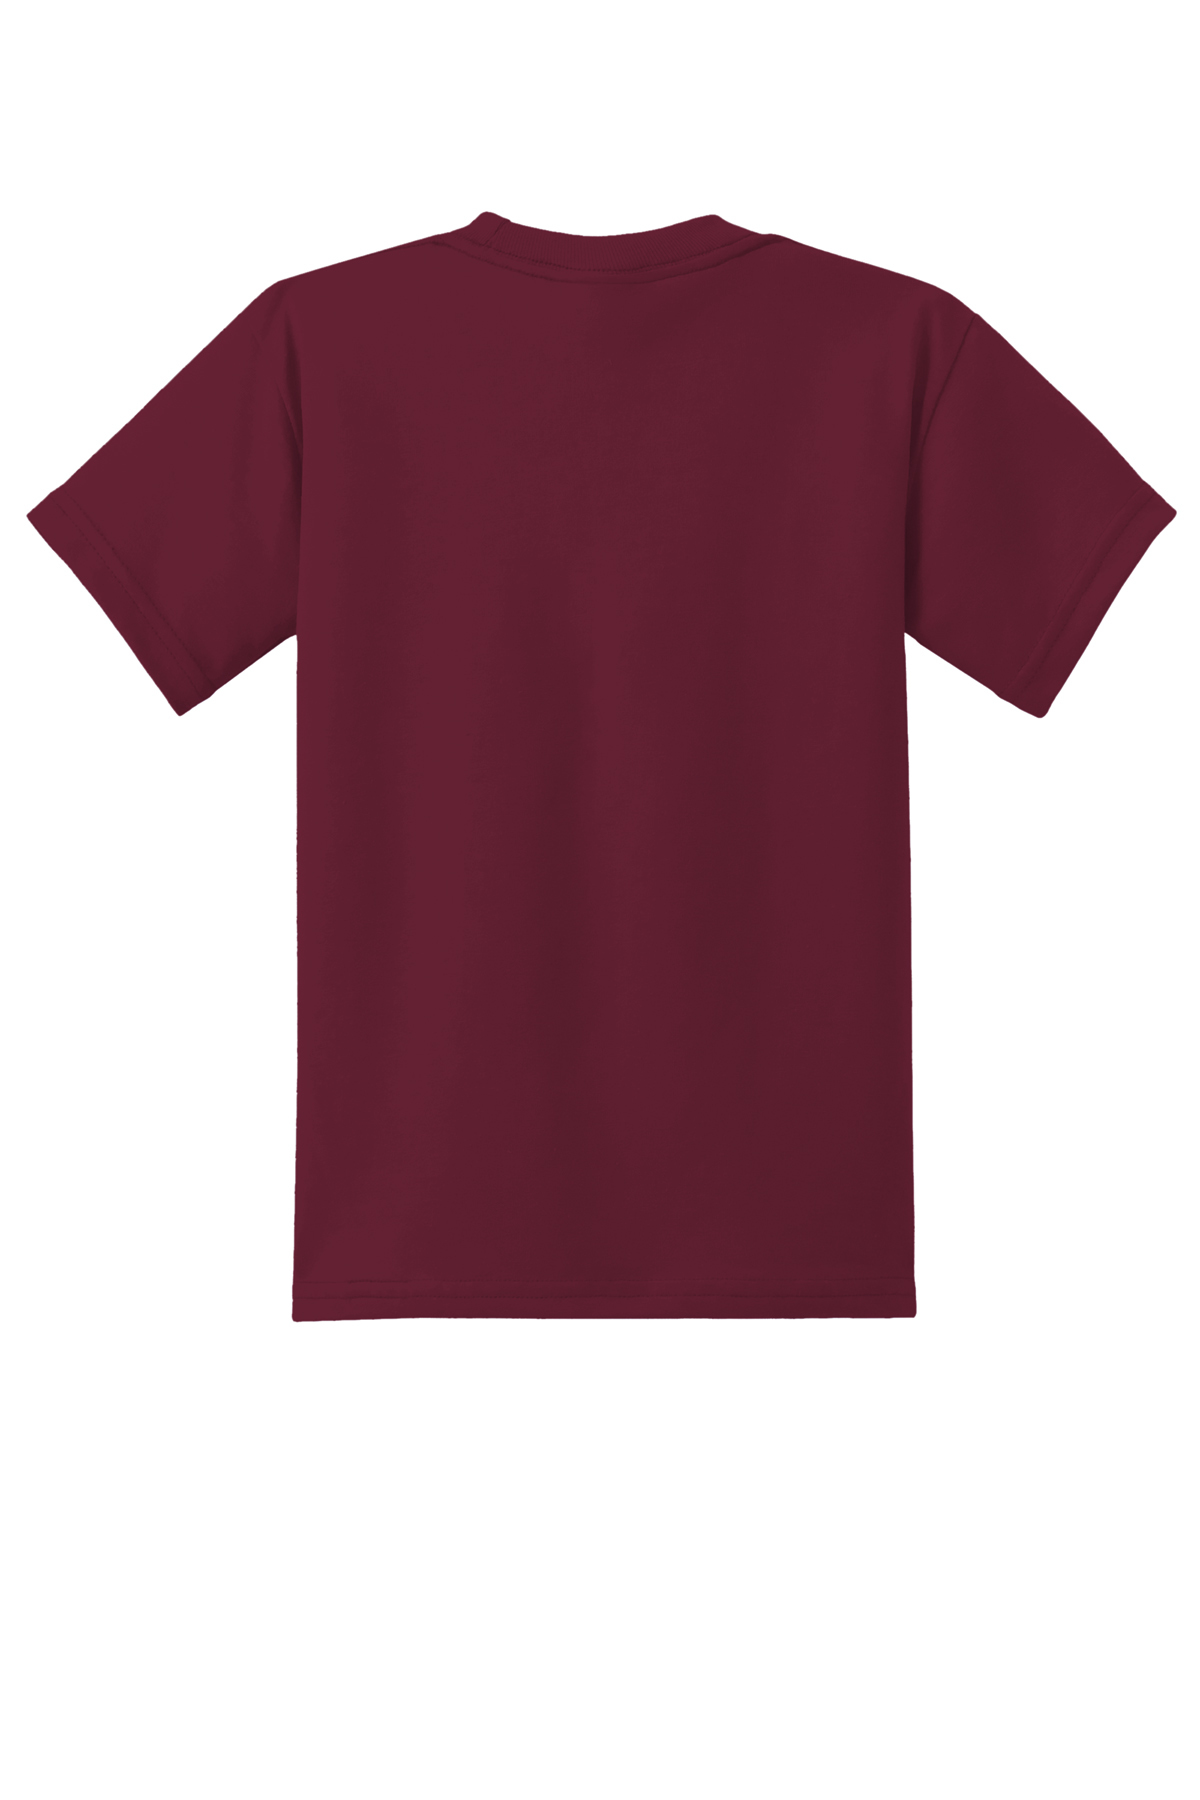 Port & Company Youth Core Blend Tee | Product | SanMar